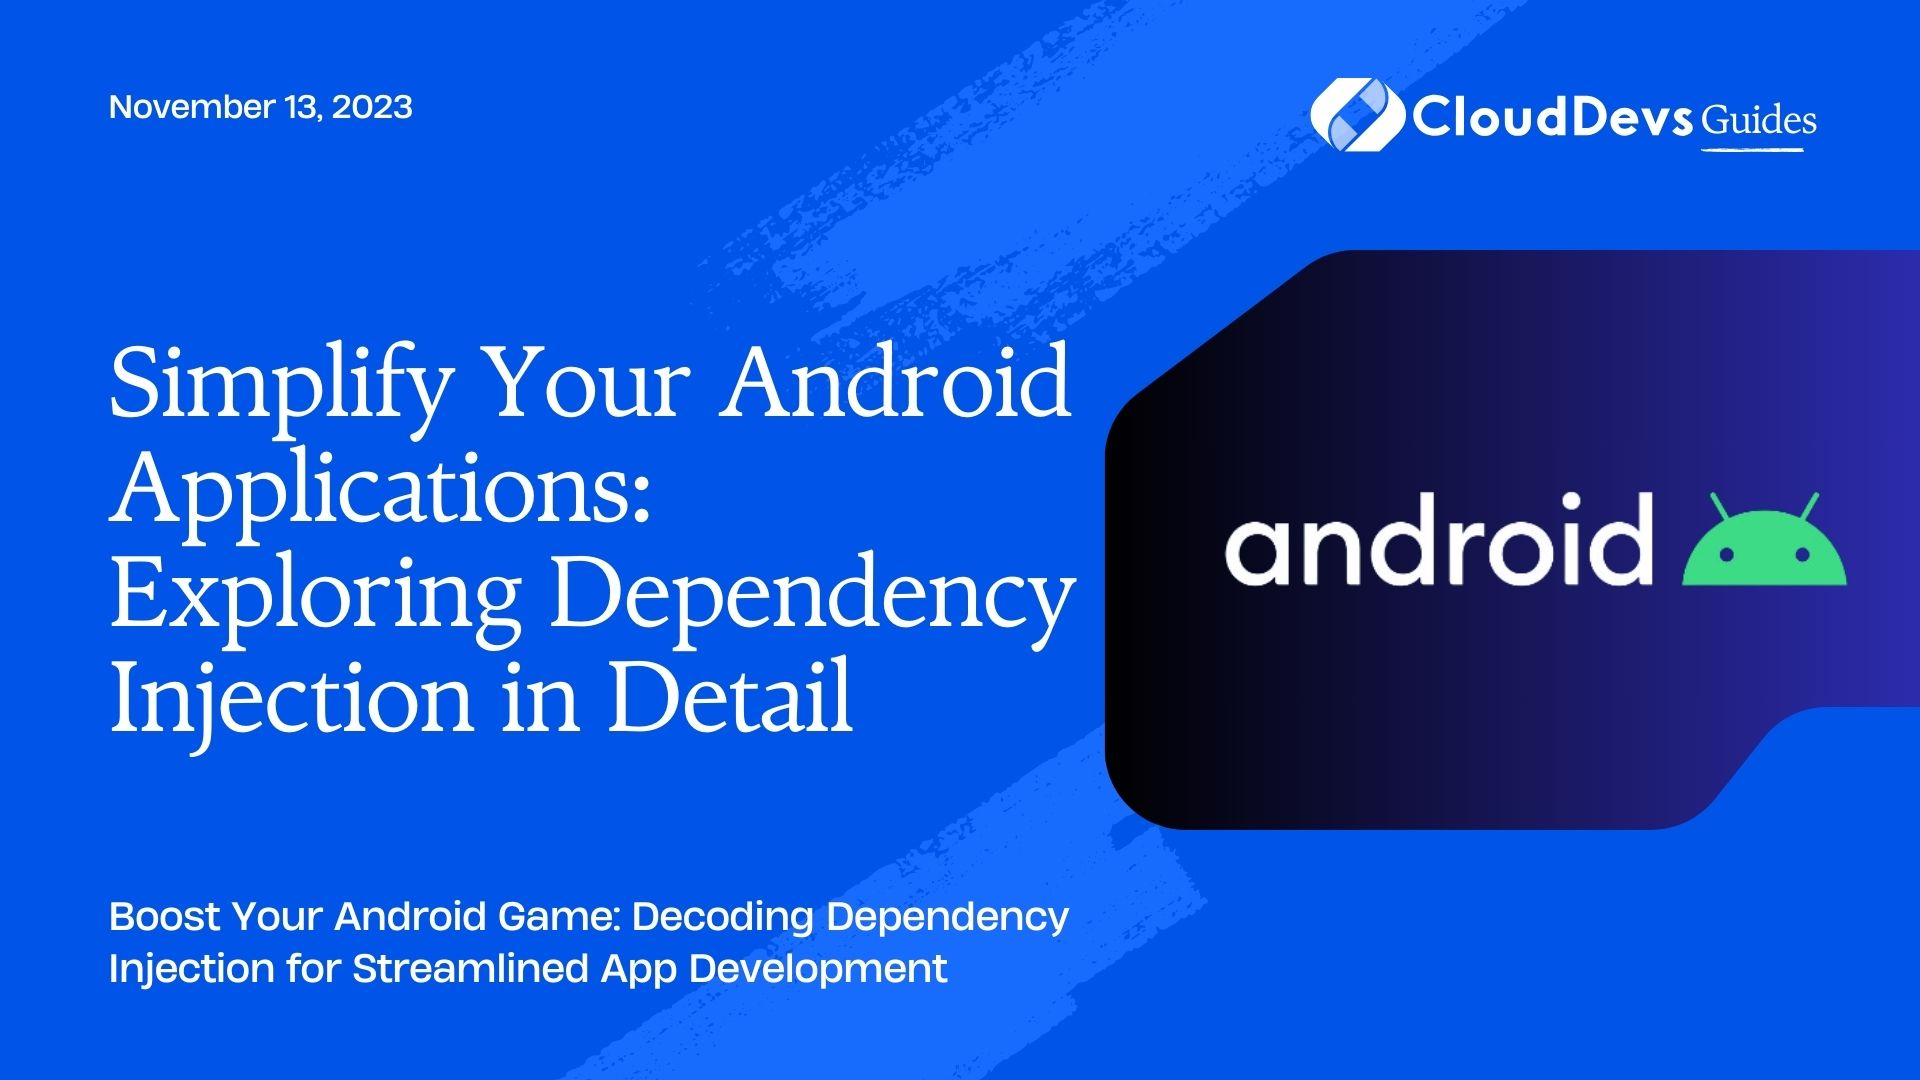 Simplify Your Android Applications: Exploring Dependency Injection in Detail